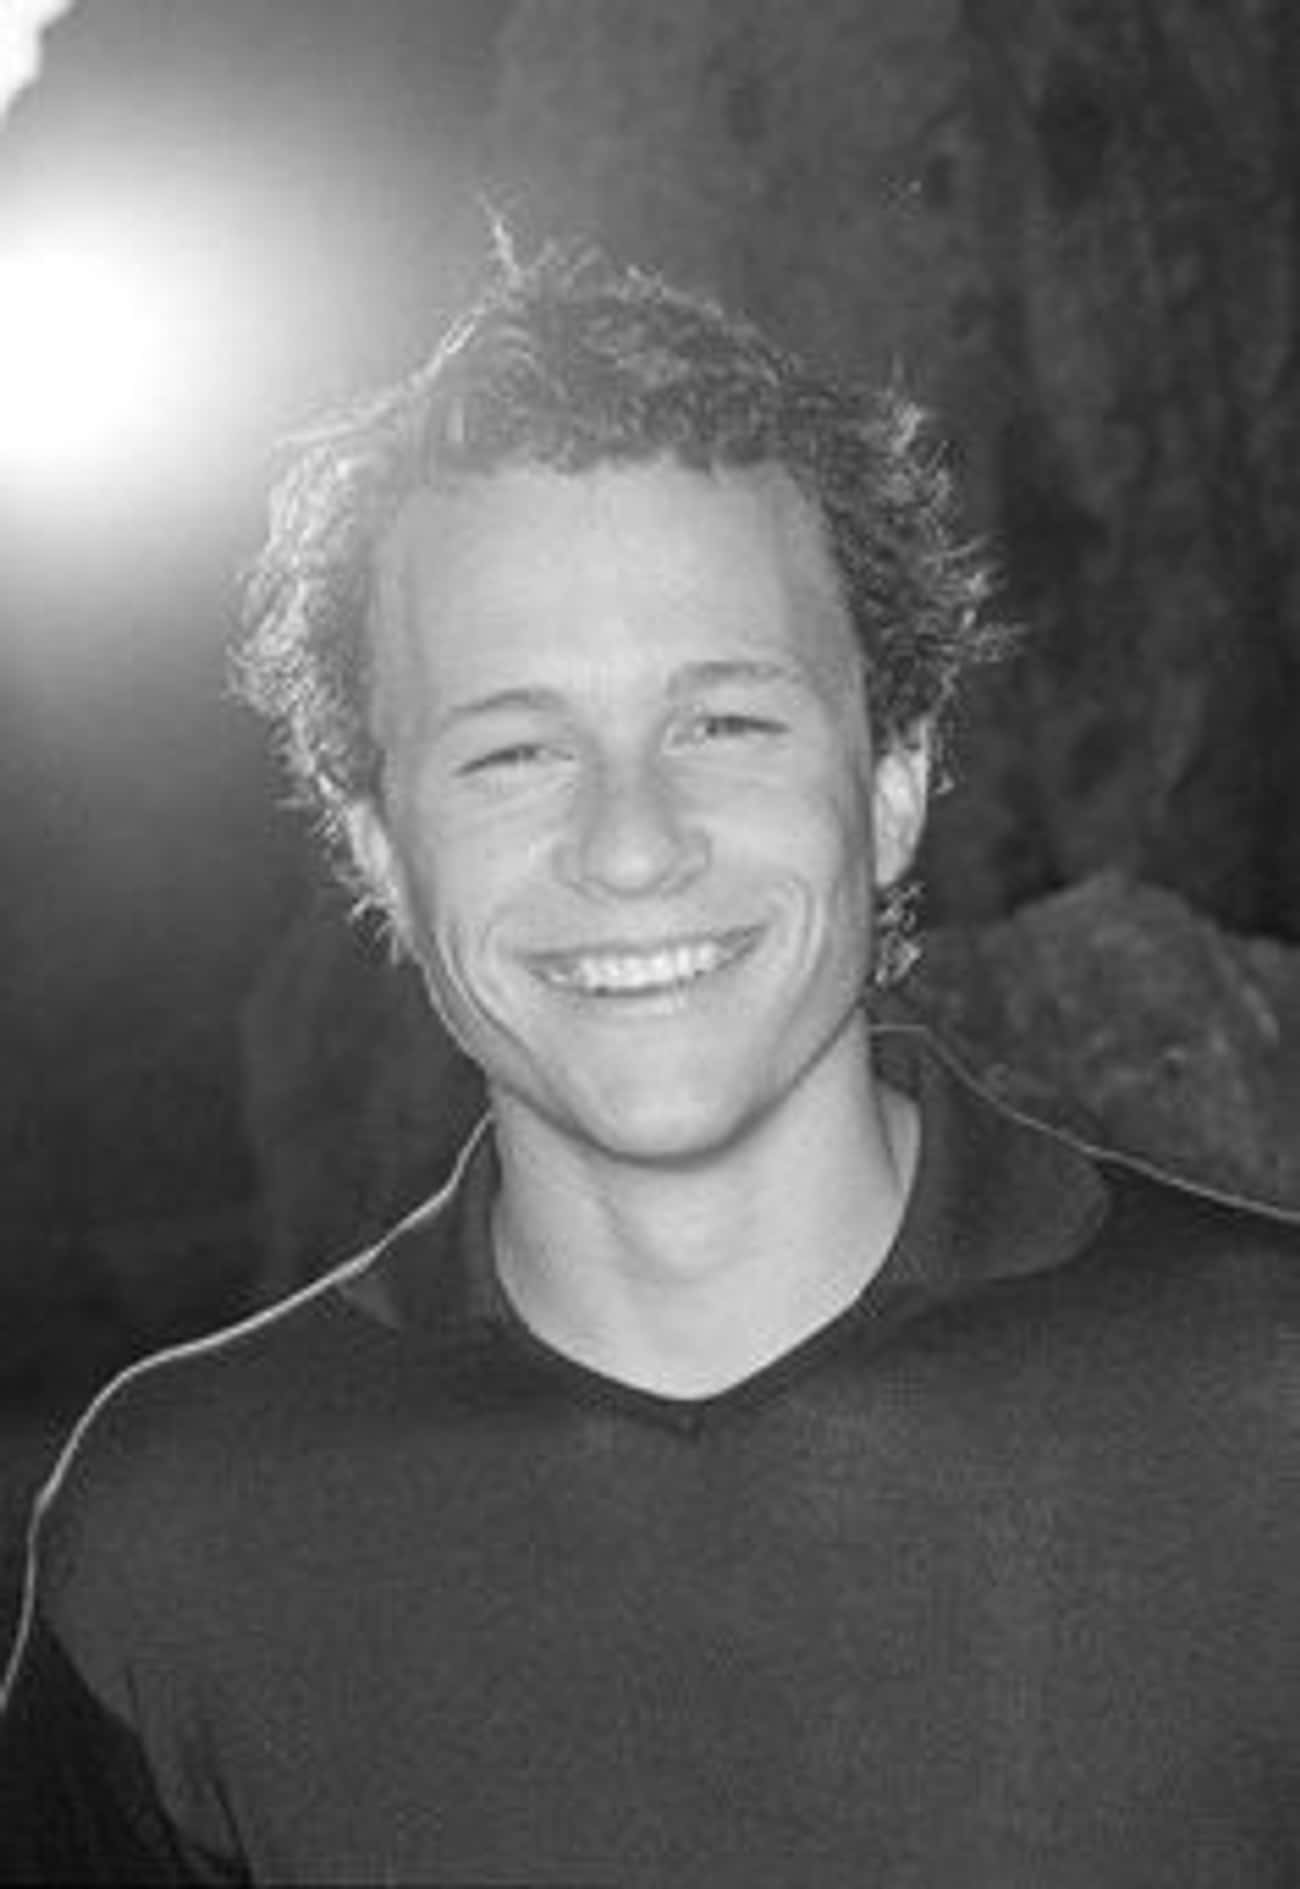 Young Heath Ledger in Fitted Gray Shirt